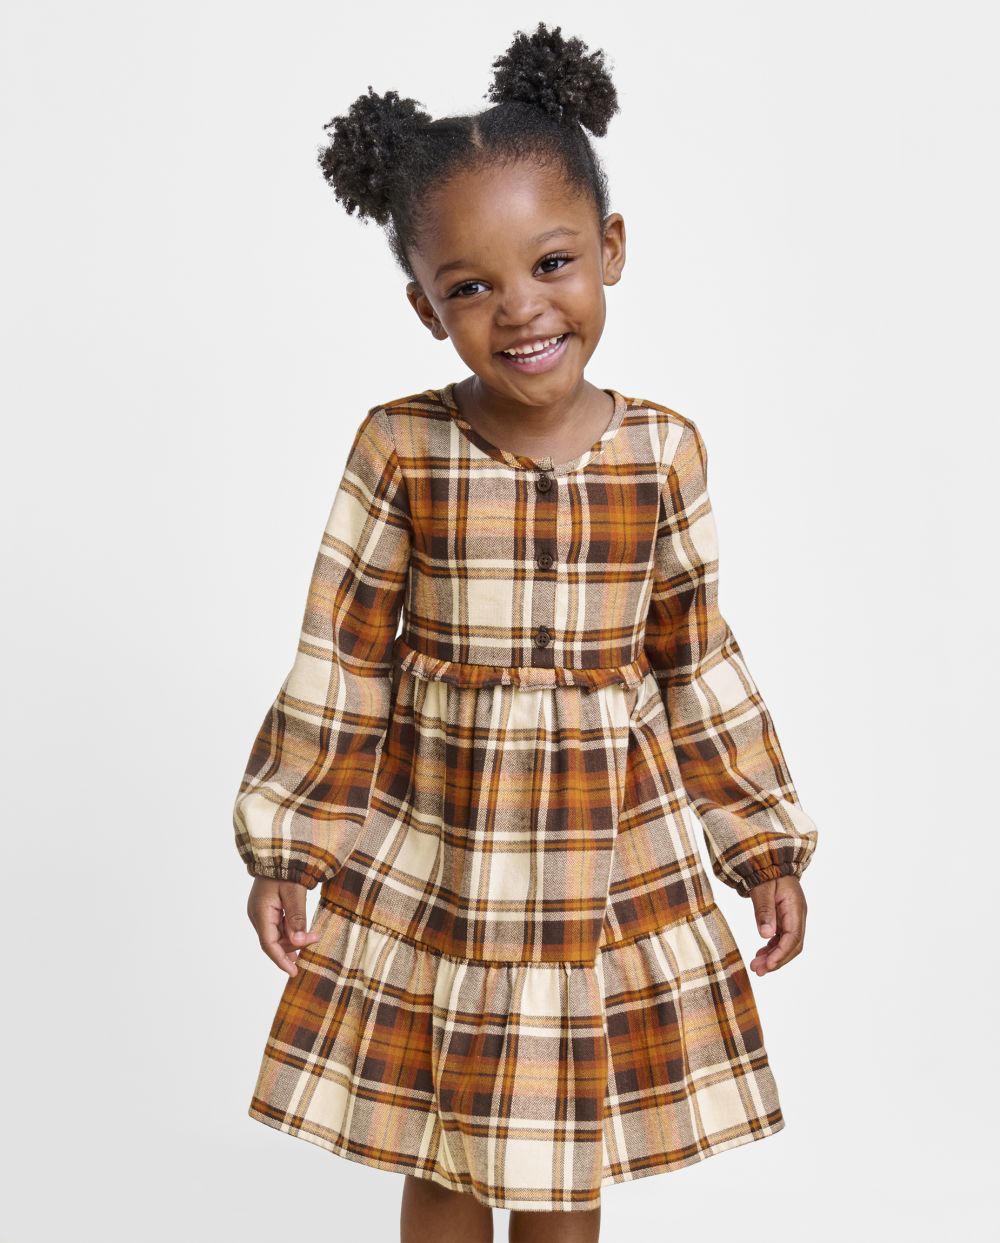 Toddler Crew Neck Cotton Plaid Print Above the Knee Tiered Ruffle Trim Long Sleeves Shirt Dress